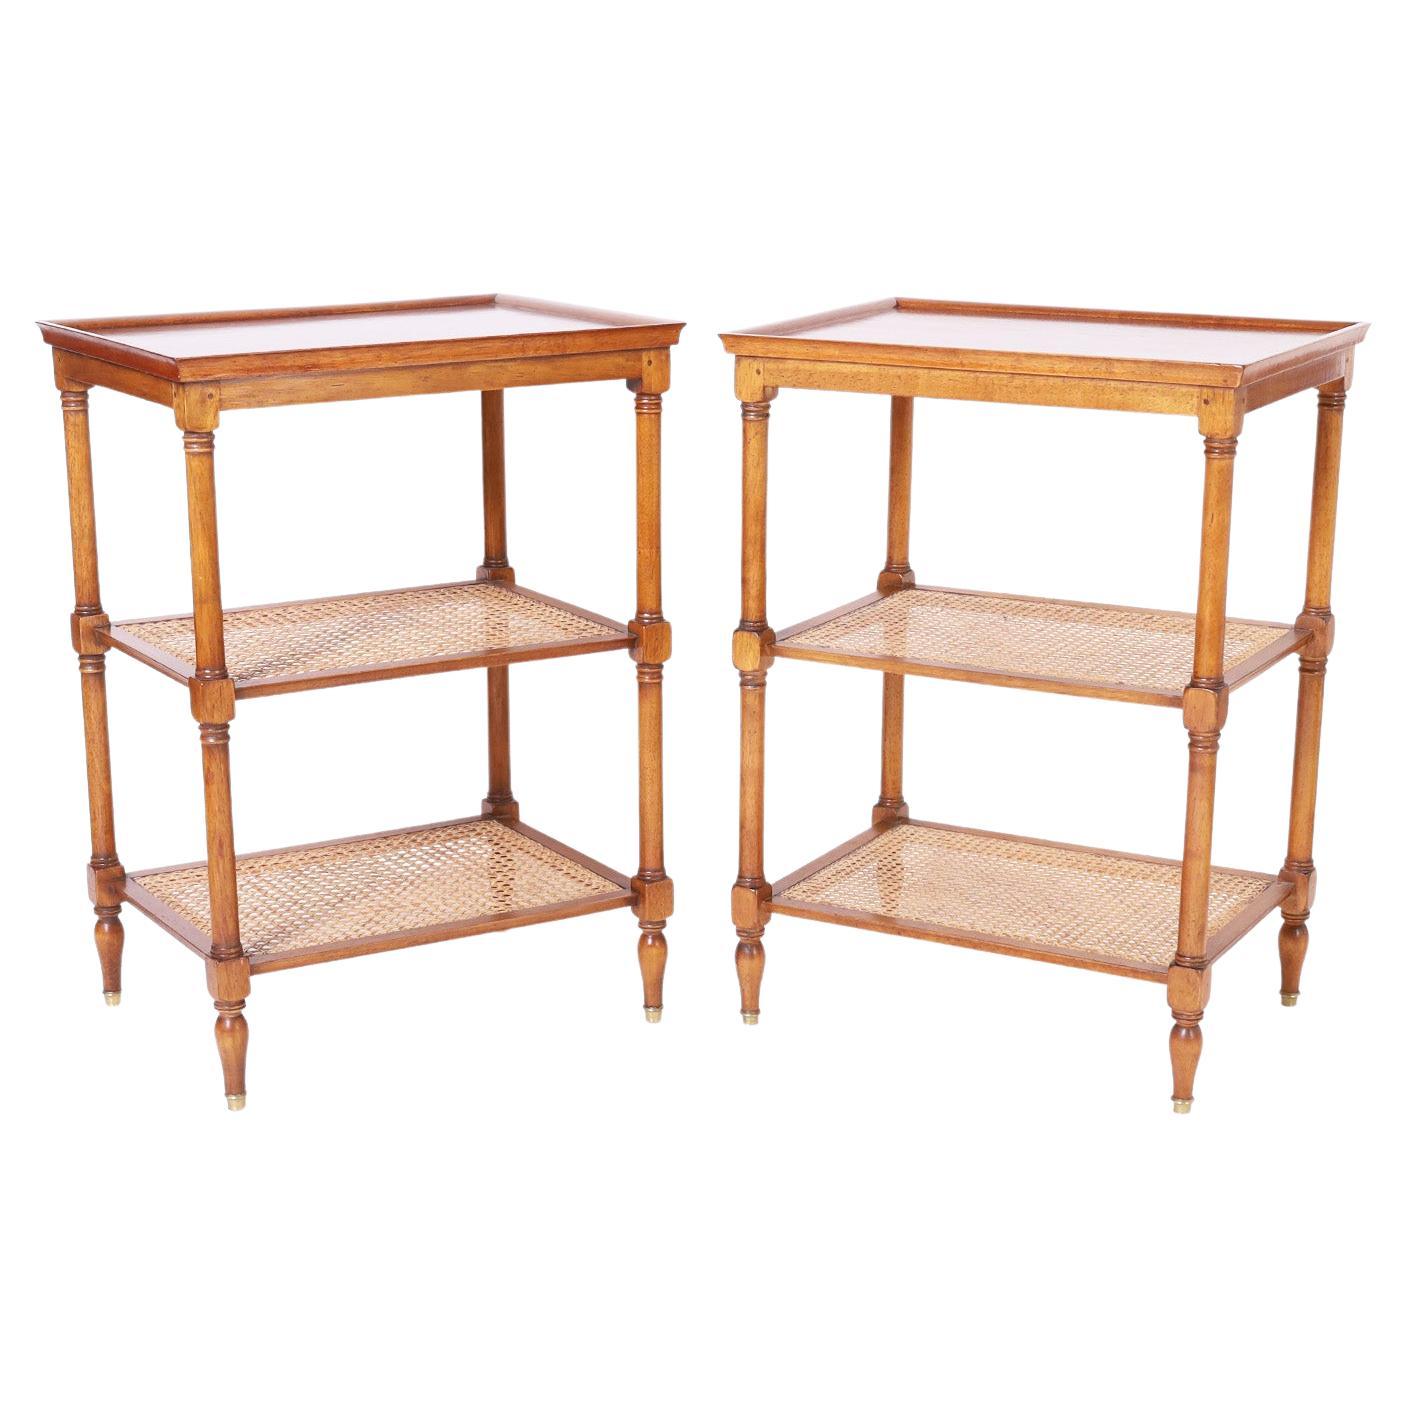 Midcentury Pair of British Colonial Style Three Tiered Stands or Tables